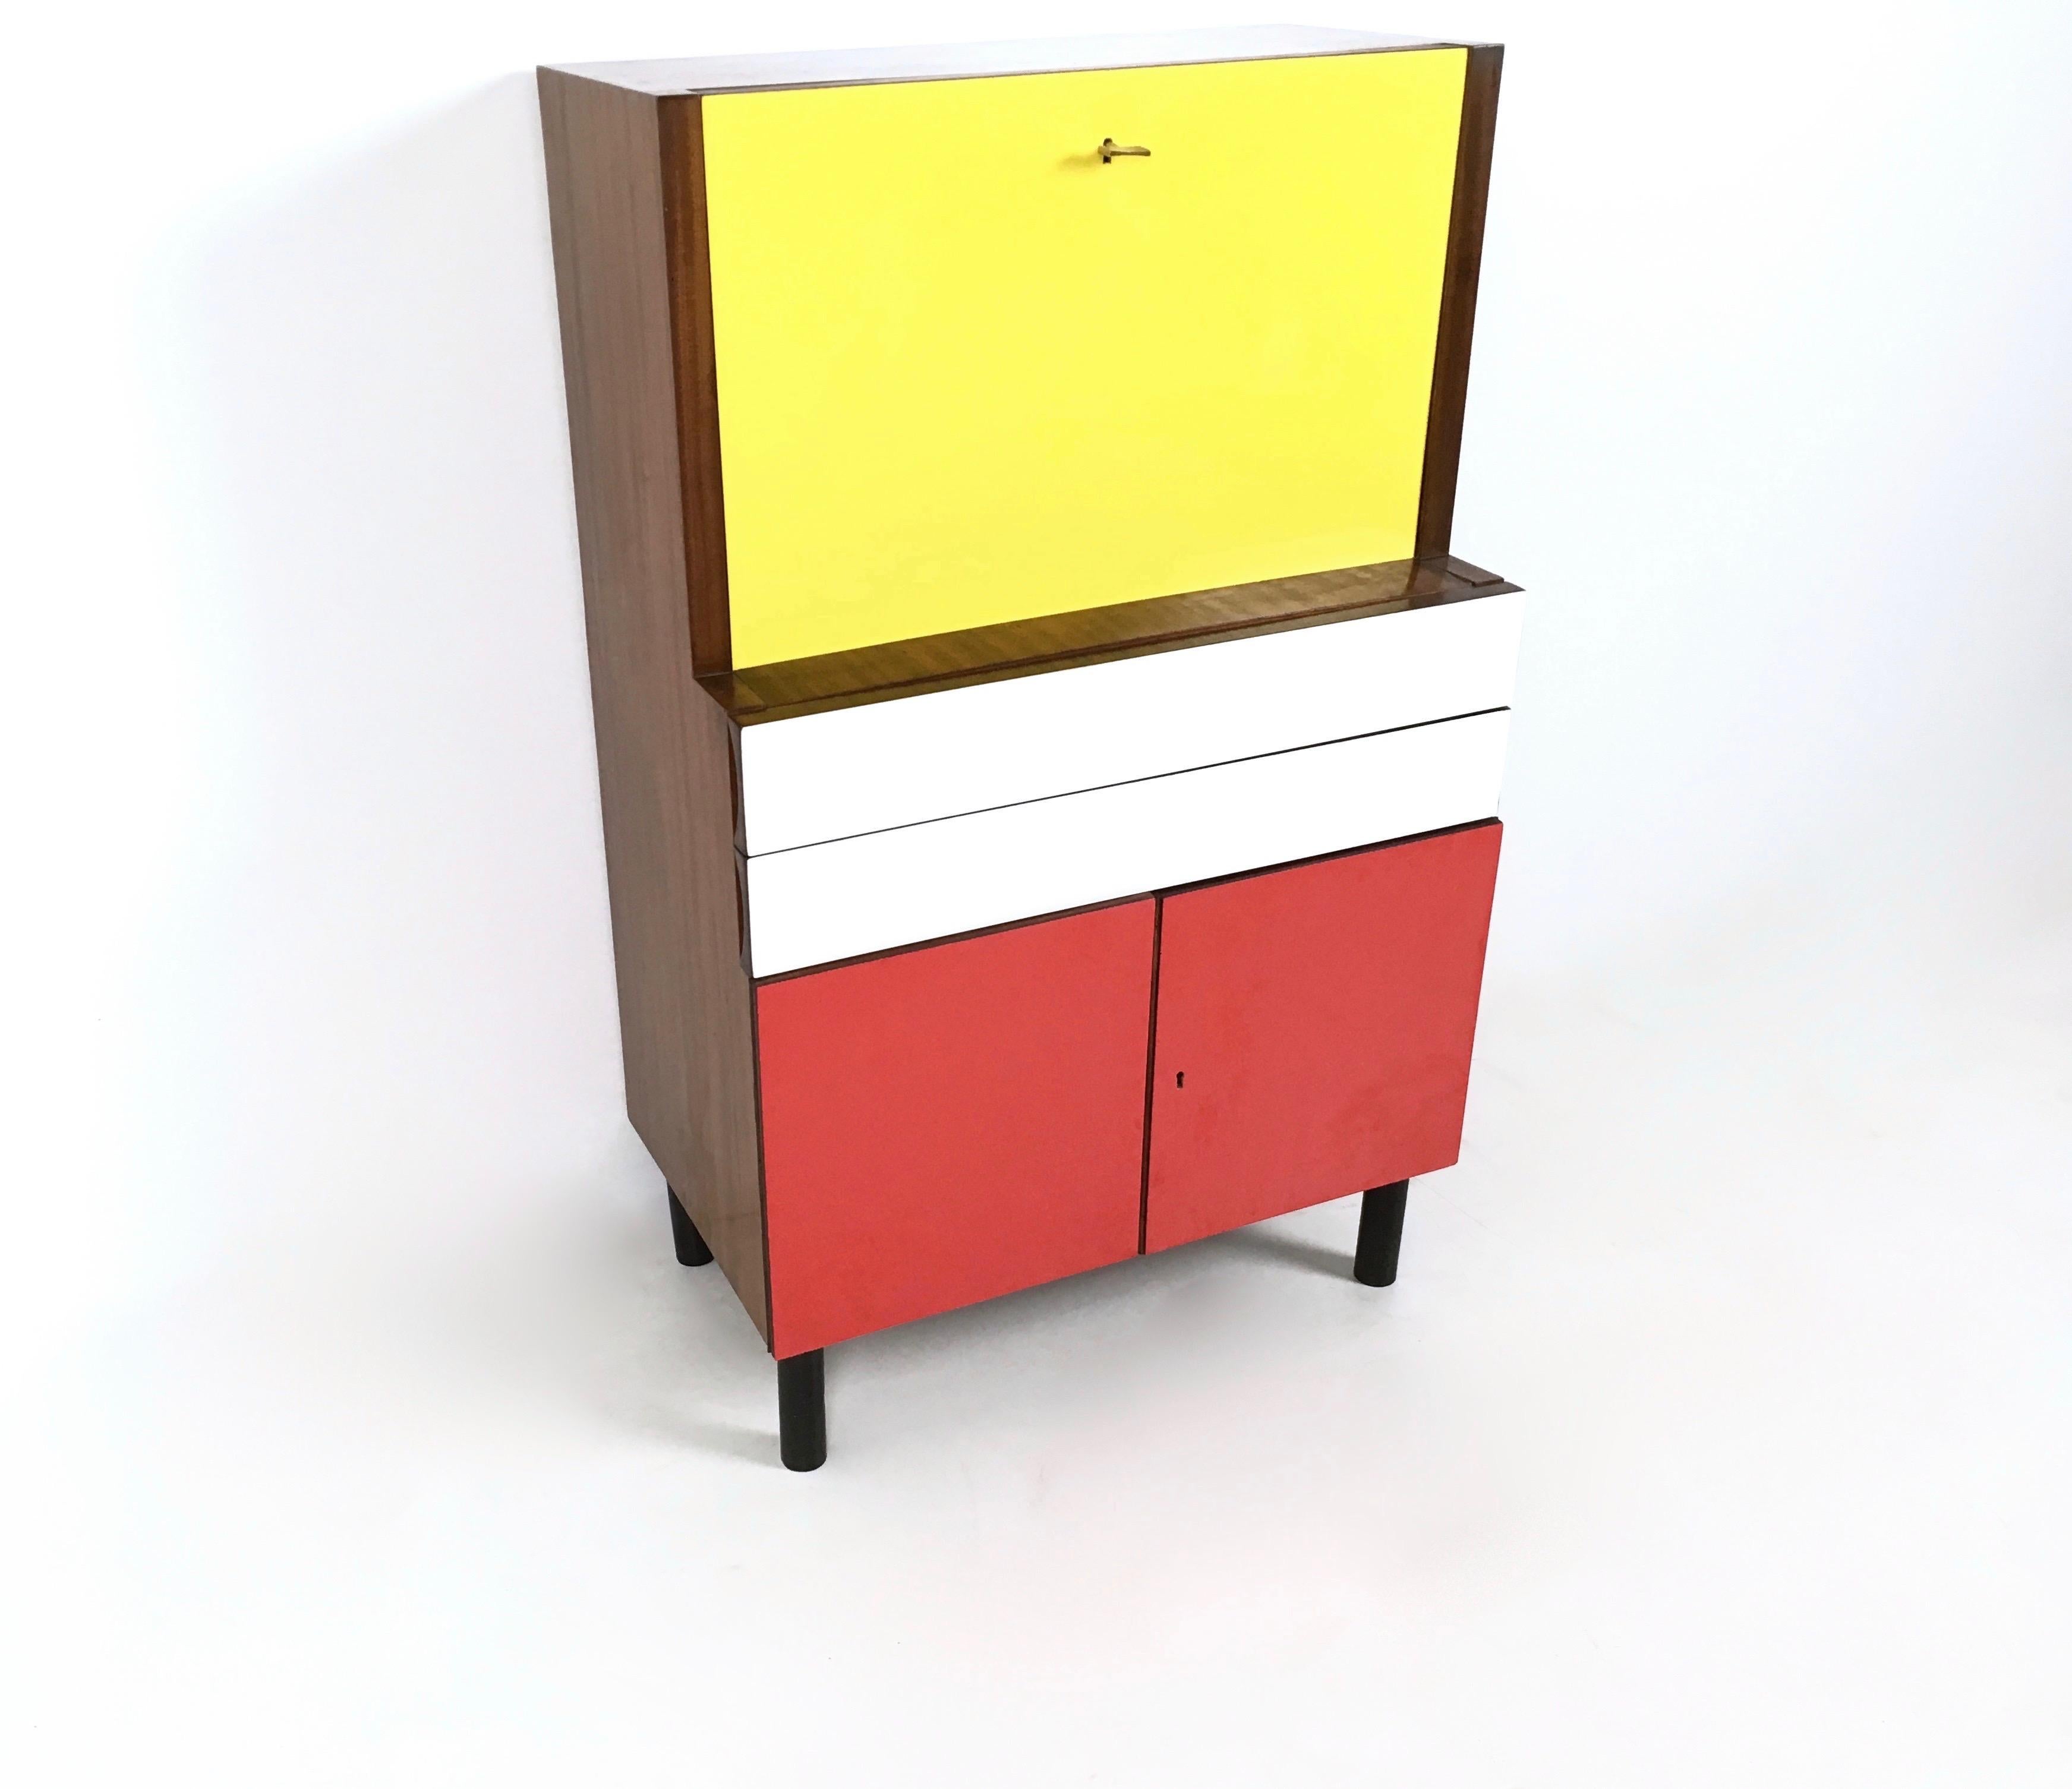 This secretaire features yellow, white and red formica sheets, one glass shelf and a back-painted glass top. 
It may show slight traces of use since it's vintage, but it can be considered as in very good original condition and ready to become a